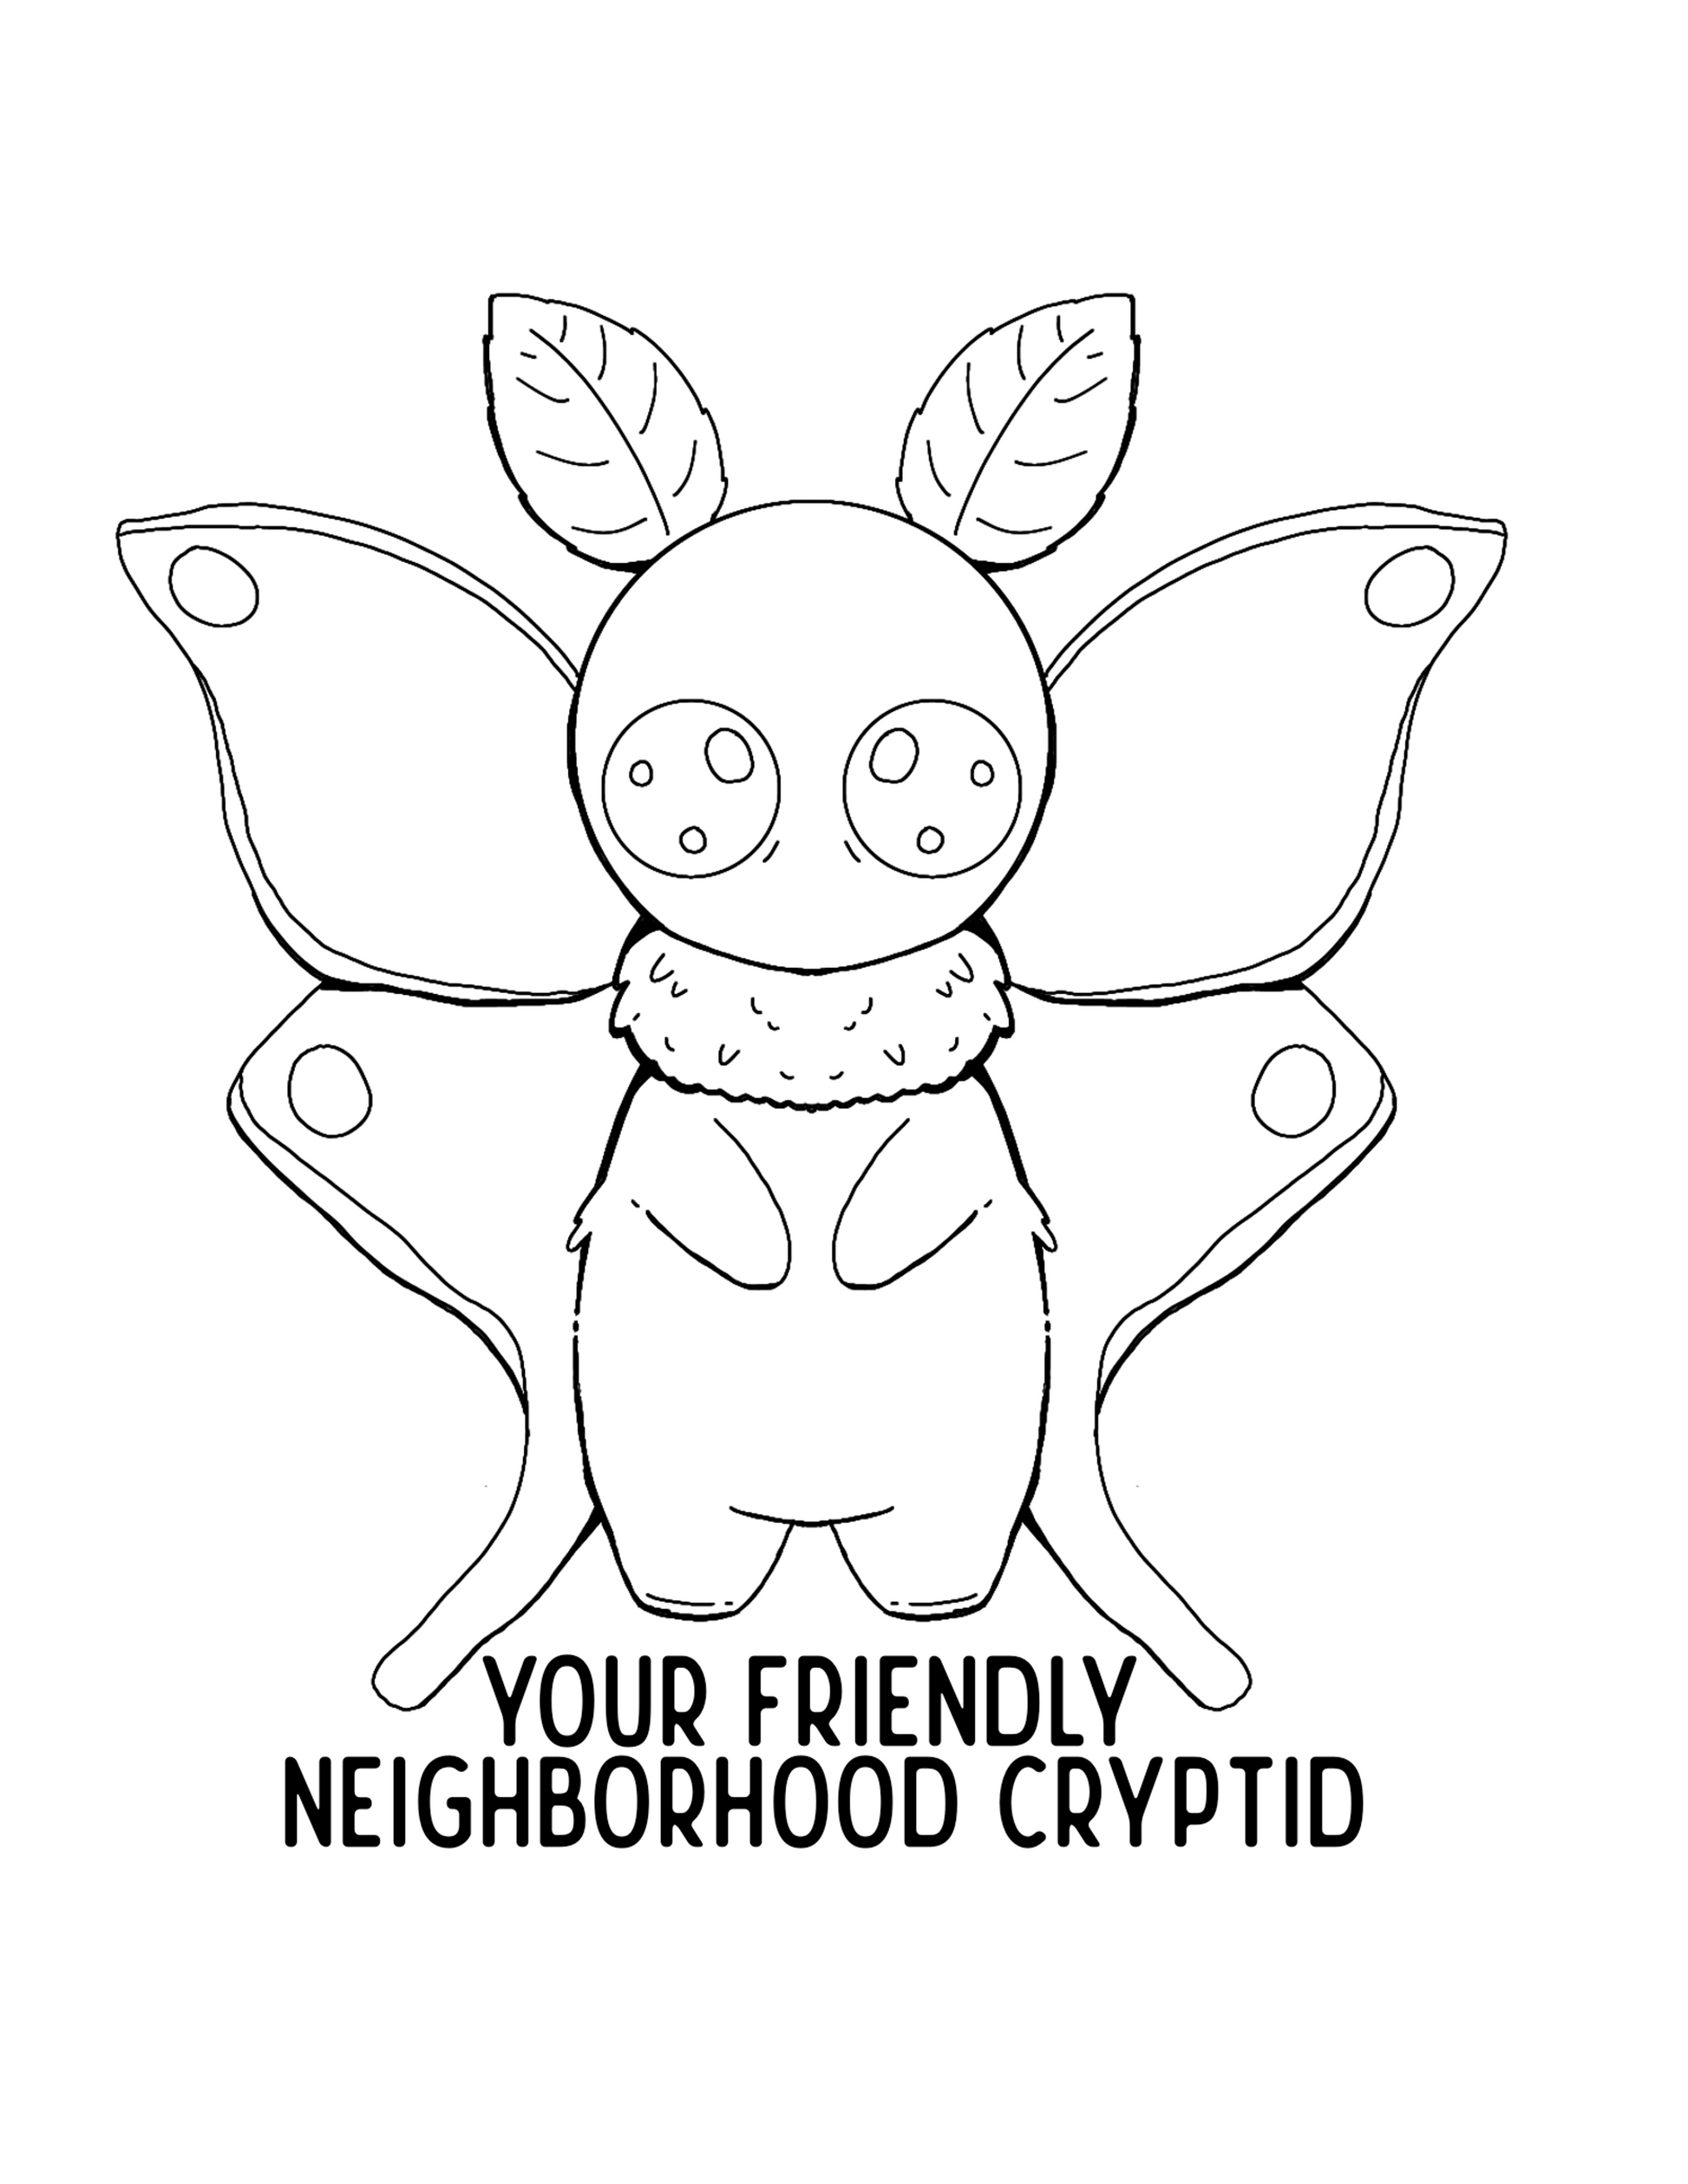 Fun Collection of Digital Cryptids and Animals Coloring Pages (12 pages) | Deviant Kreations - Deviantkreations - animals, Coloring Page, cryptid, Digital